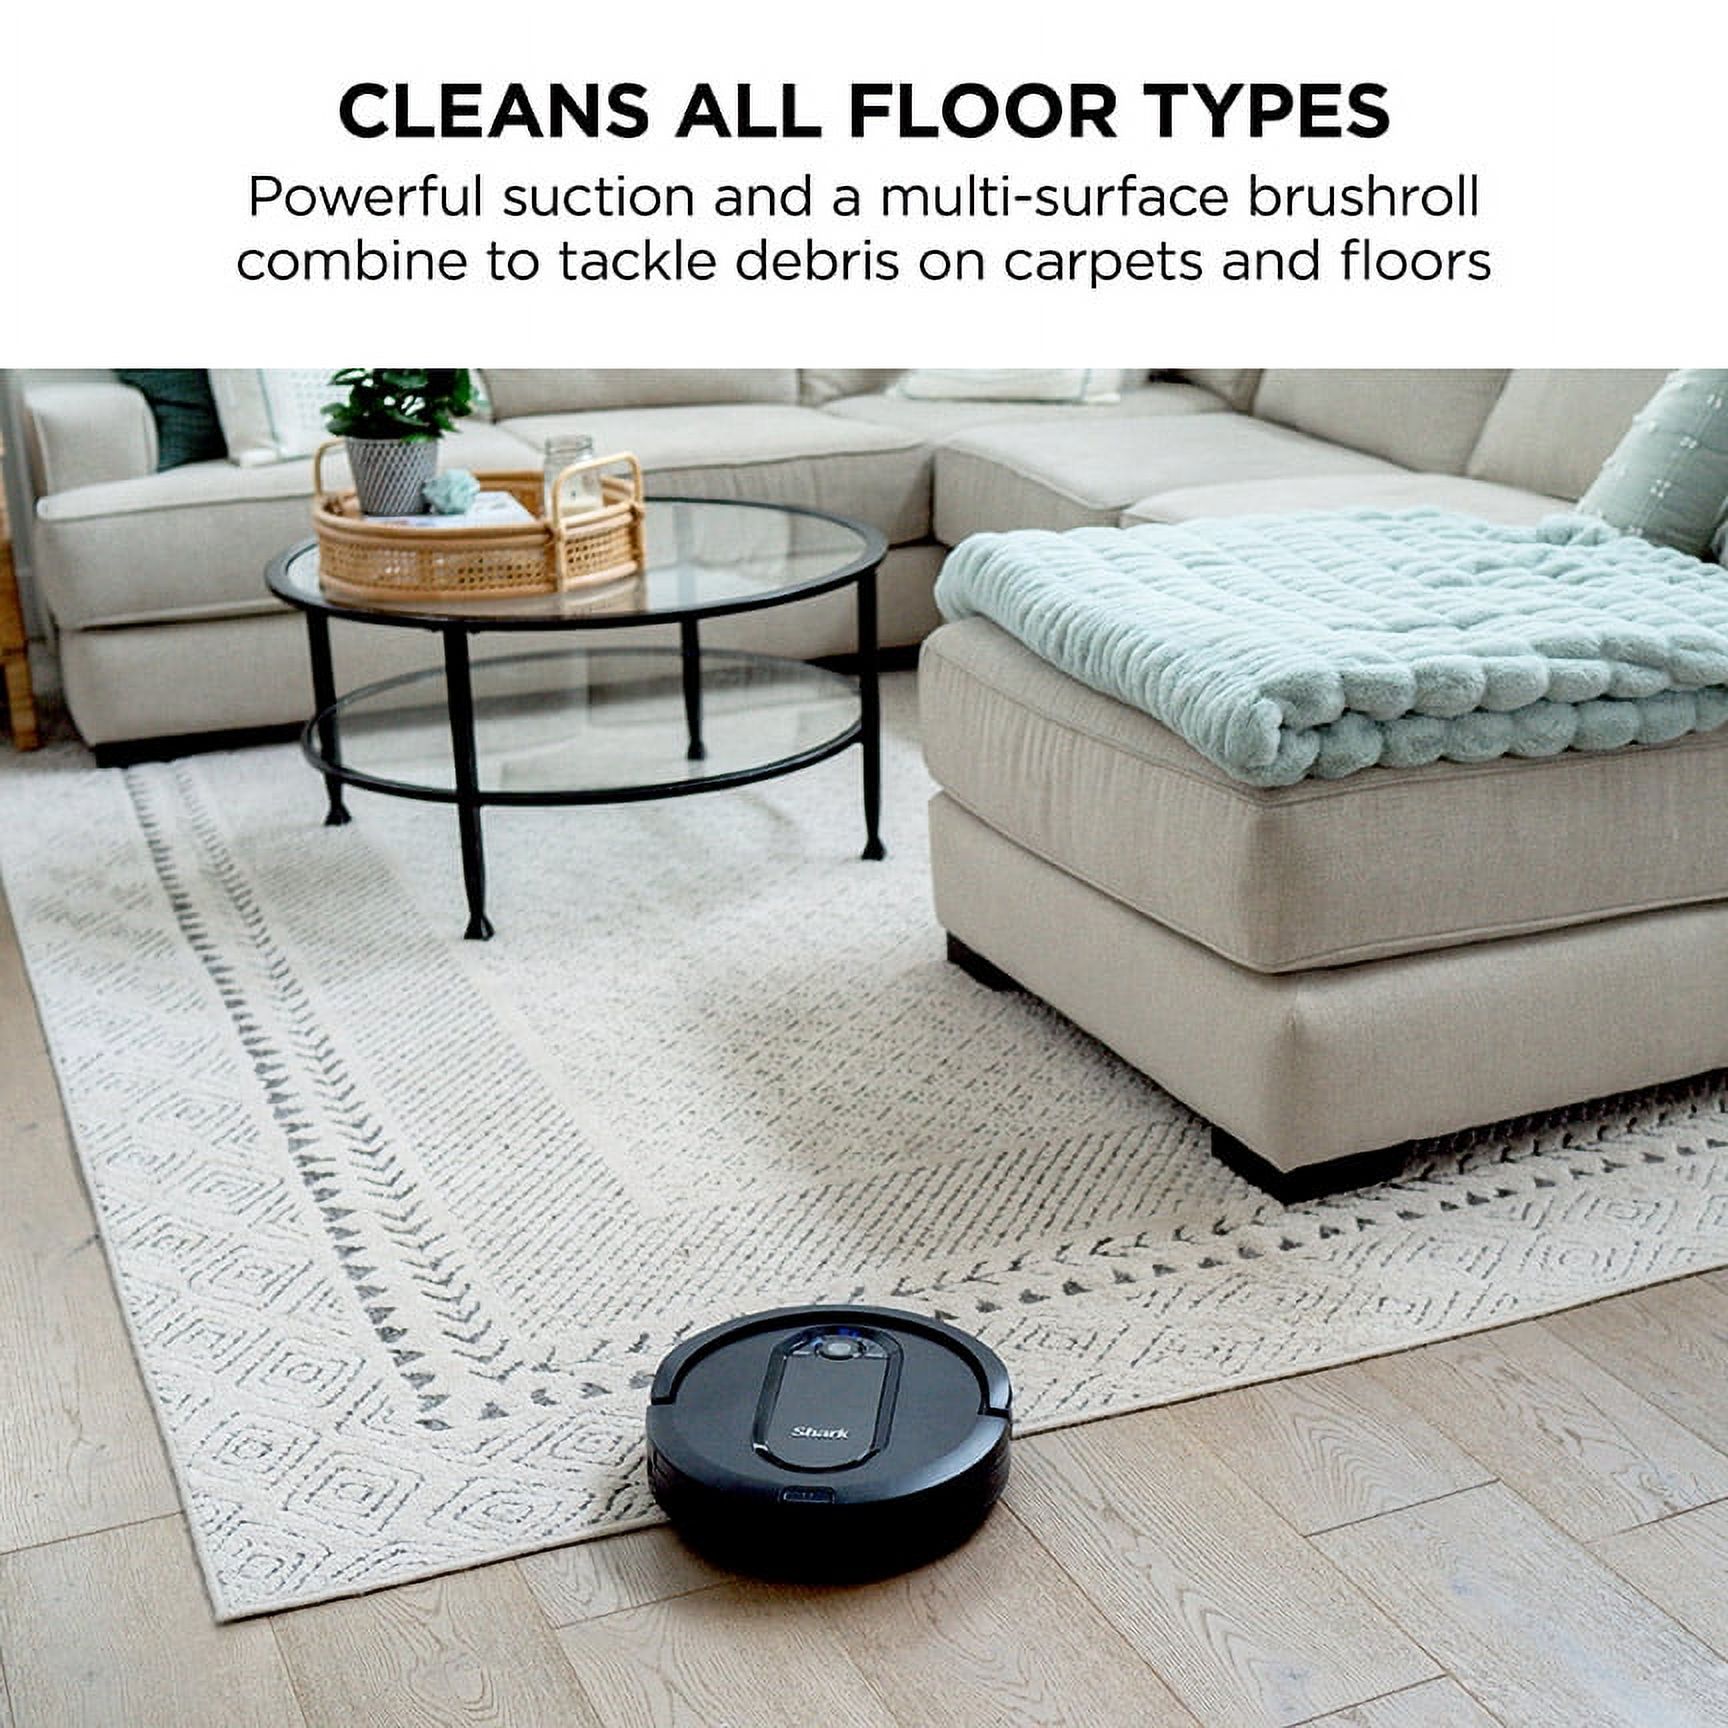 Shark EZ Robot Vacuum with Row-by-Row Cleaning, Powerful Suction, Wi-Fi, Carpets & Hard Floors,RV990 - image 3 of 9